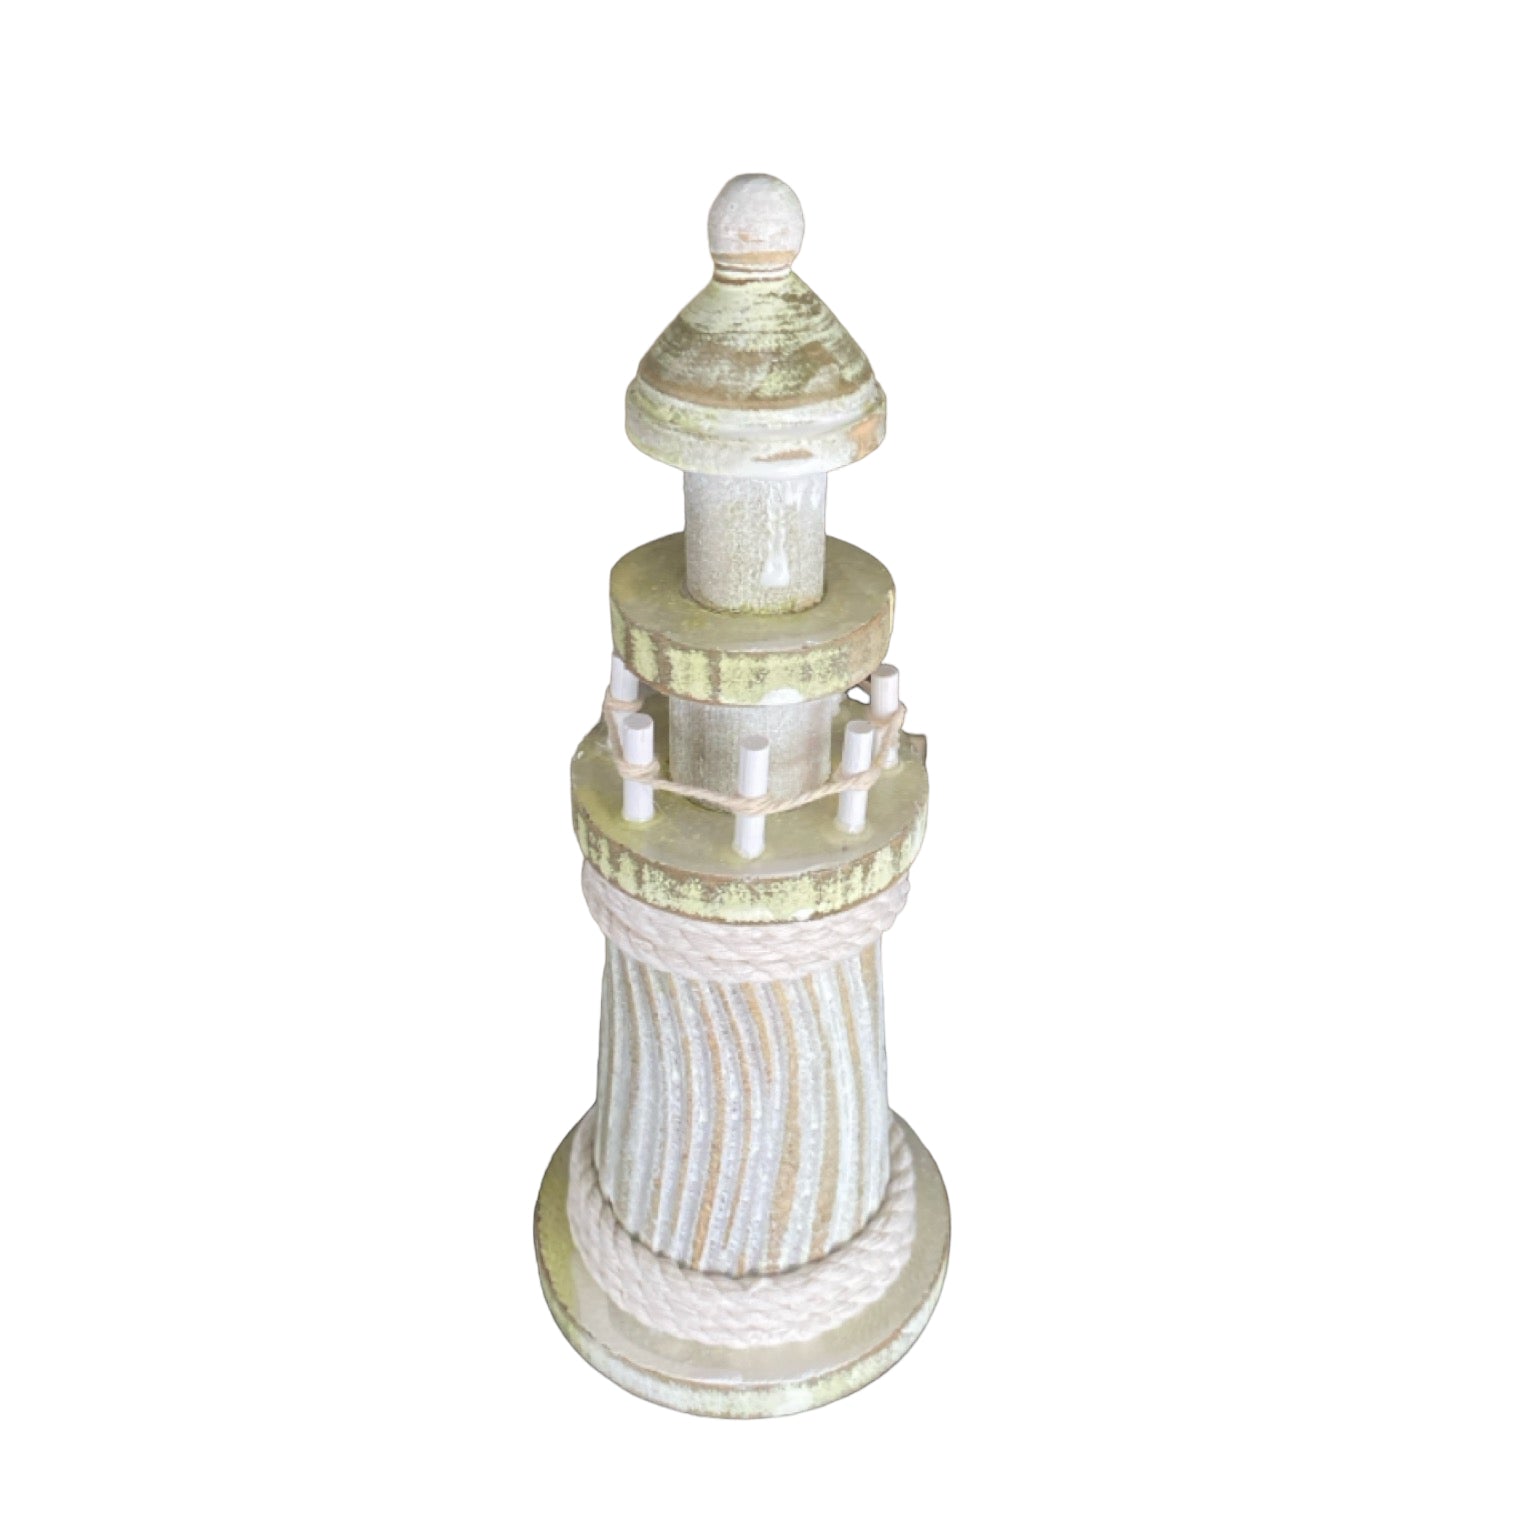 Light House Beach Lighthouse White Wash Small - The Renmy Store Homewares & Gifts 